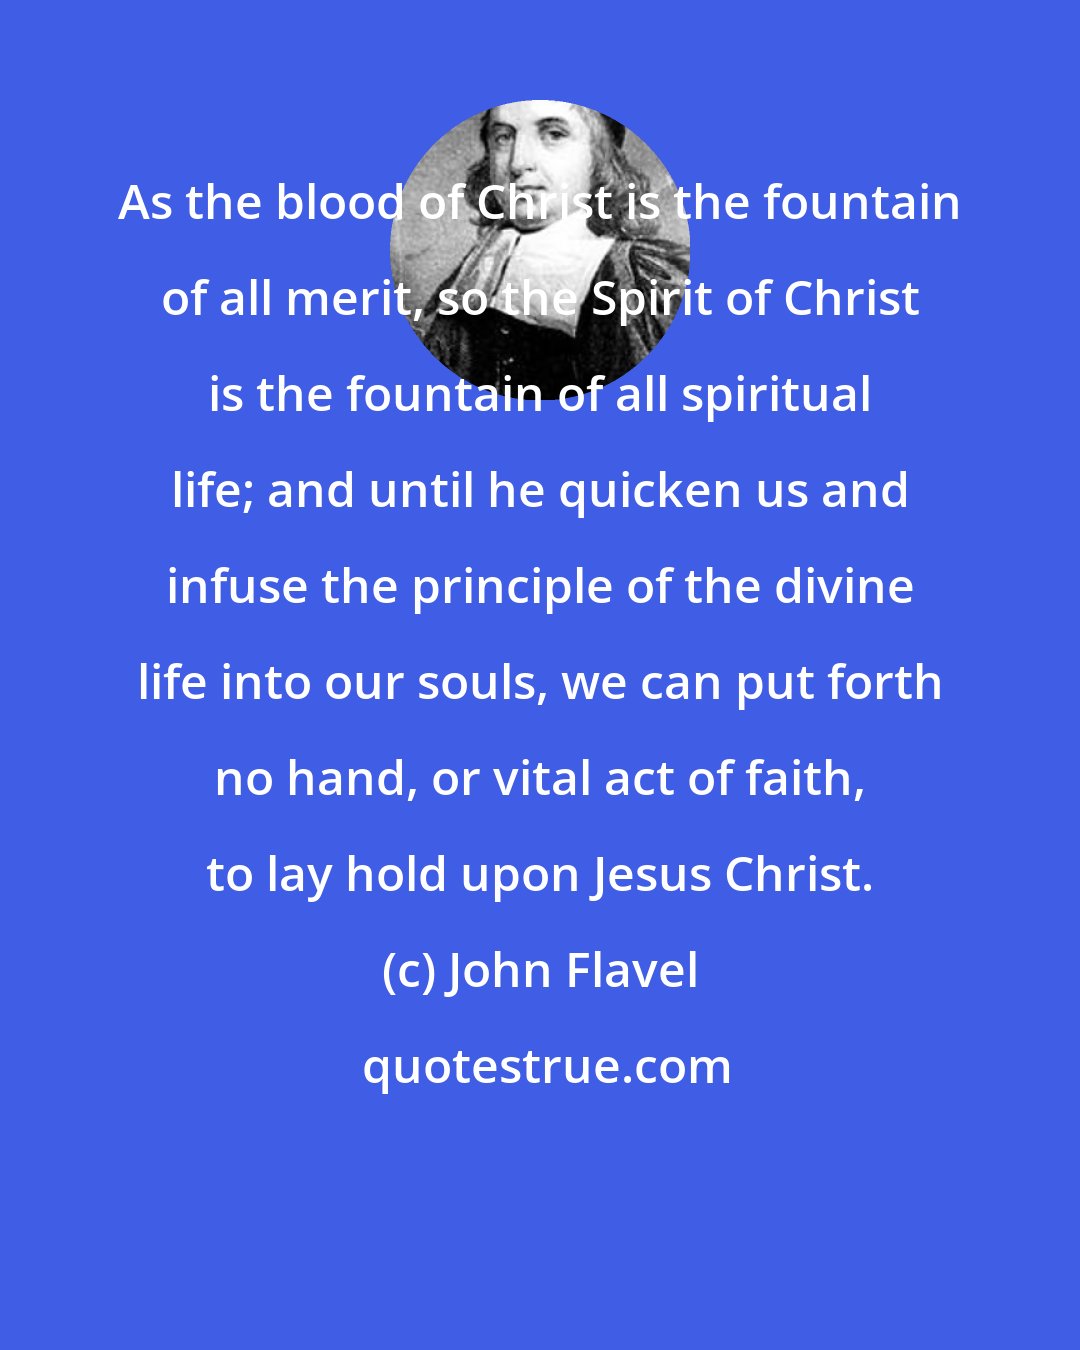 John Flavel: As the blood of Christ is the fountain of all merit, so the Spirit of Christ is the fountain of all spiritual life; and until he quicken us and infuse the principle of the divine life into our souls, we can put forth no hand, or vital act of faith, to lay hold upon Jesus Christ.